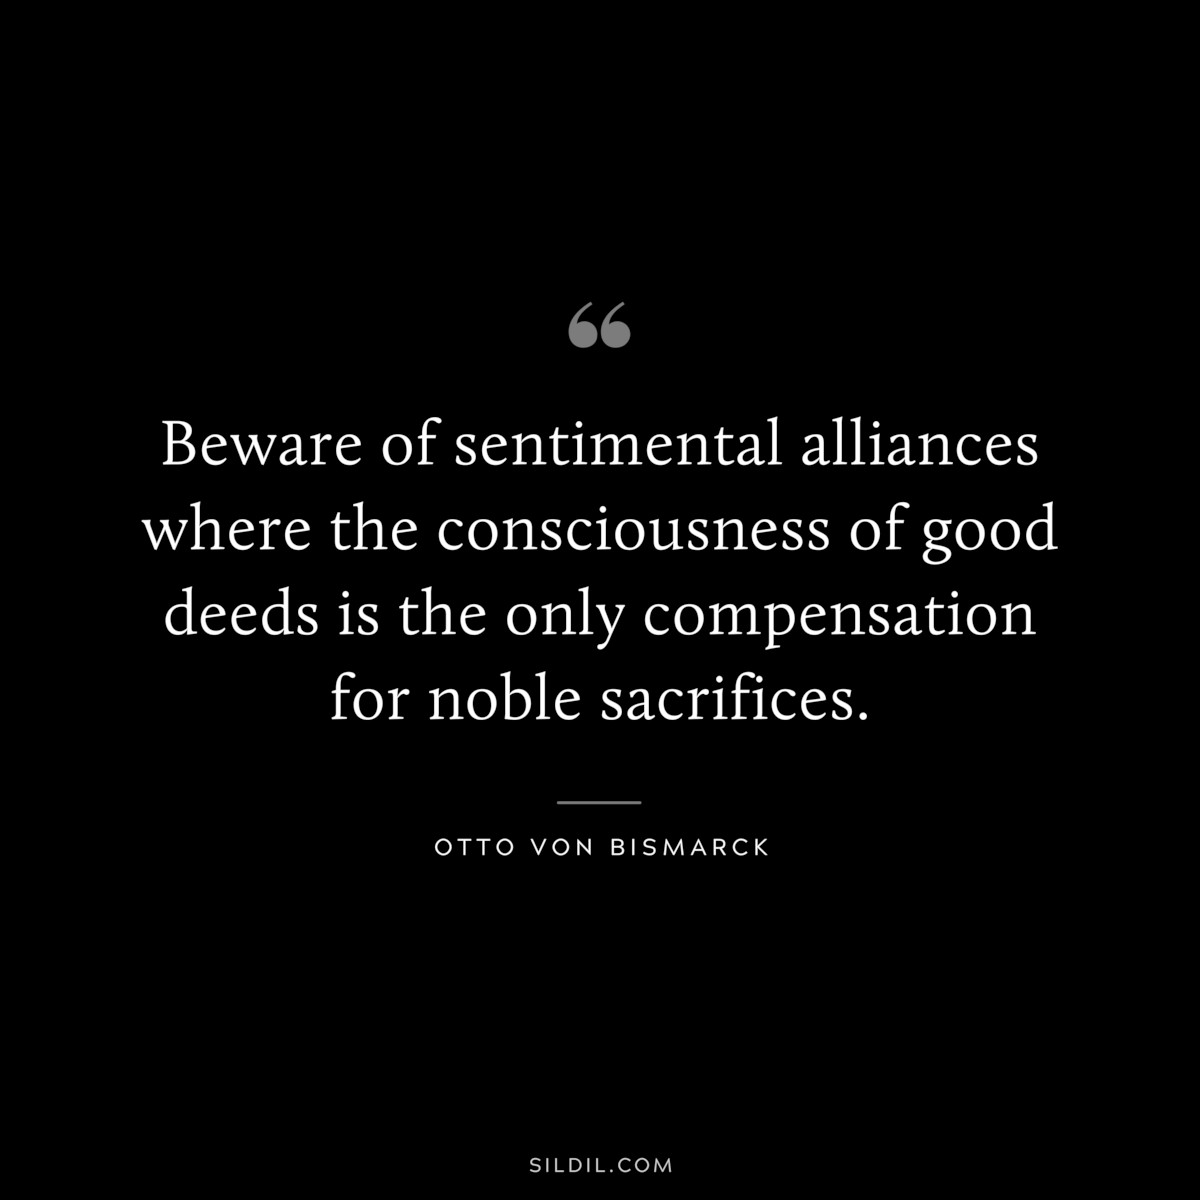 Beware of sentimental alliances where the consciousness of good deeds is the only compensation for noble sacrifices. ― Otto von Bismarck